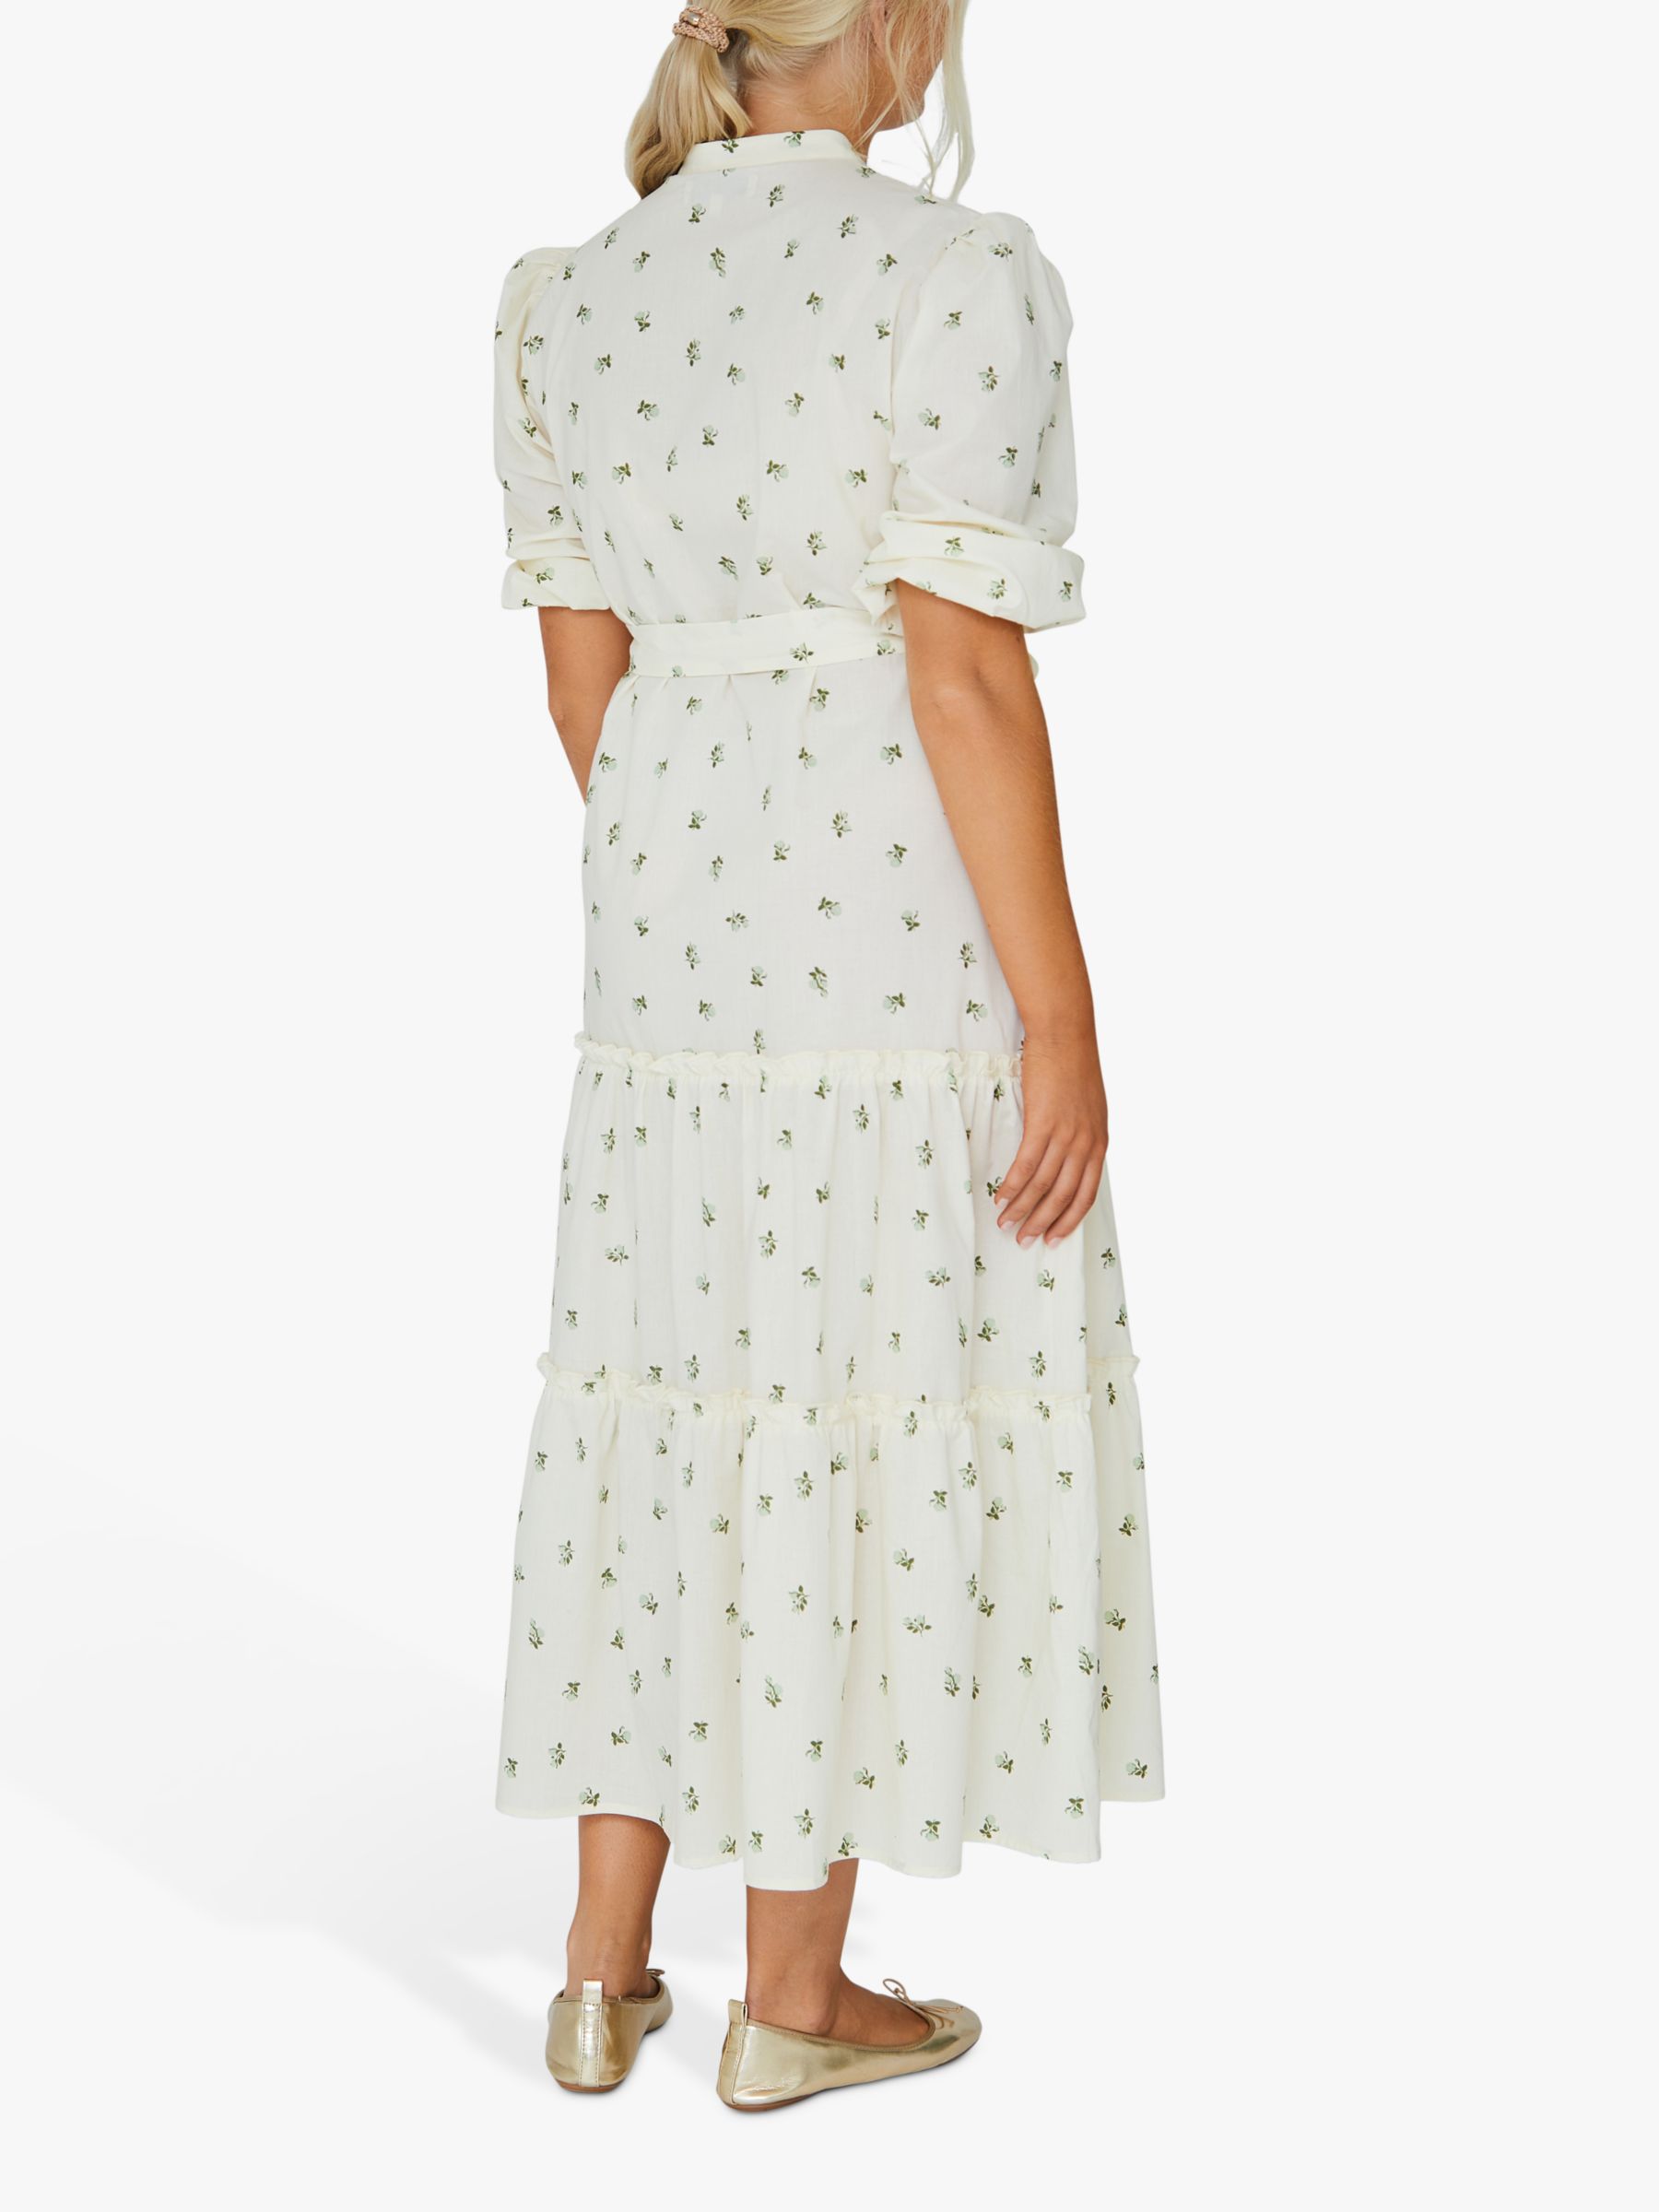 A-VIEW Kate Tiered Floral Maxi Dress, Pale Mint/Off White, 8